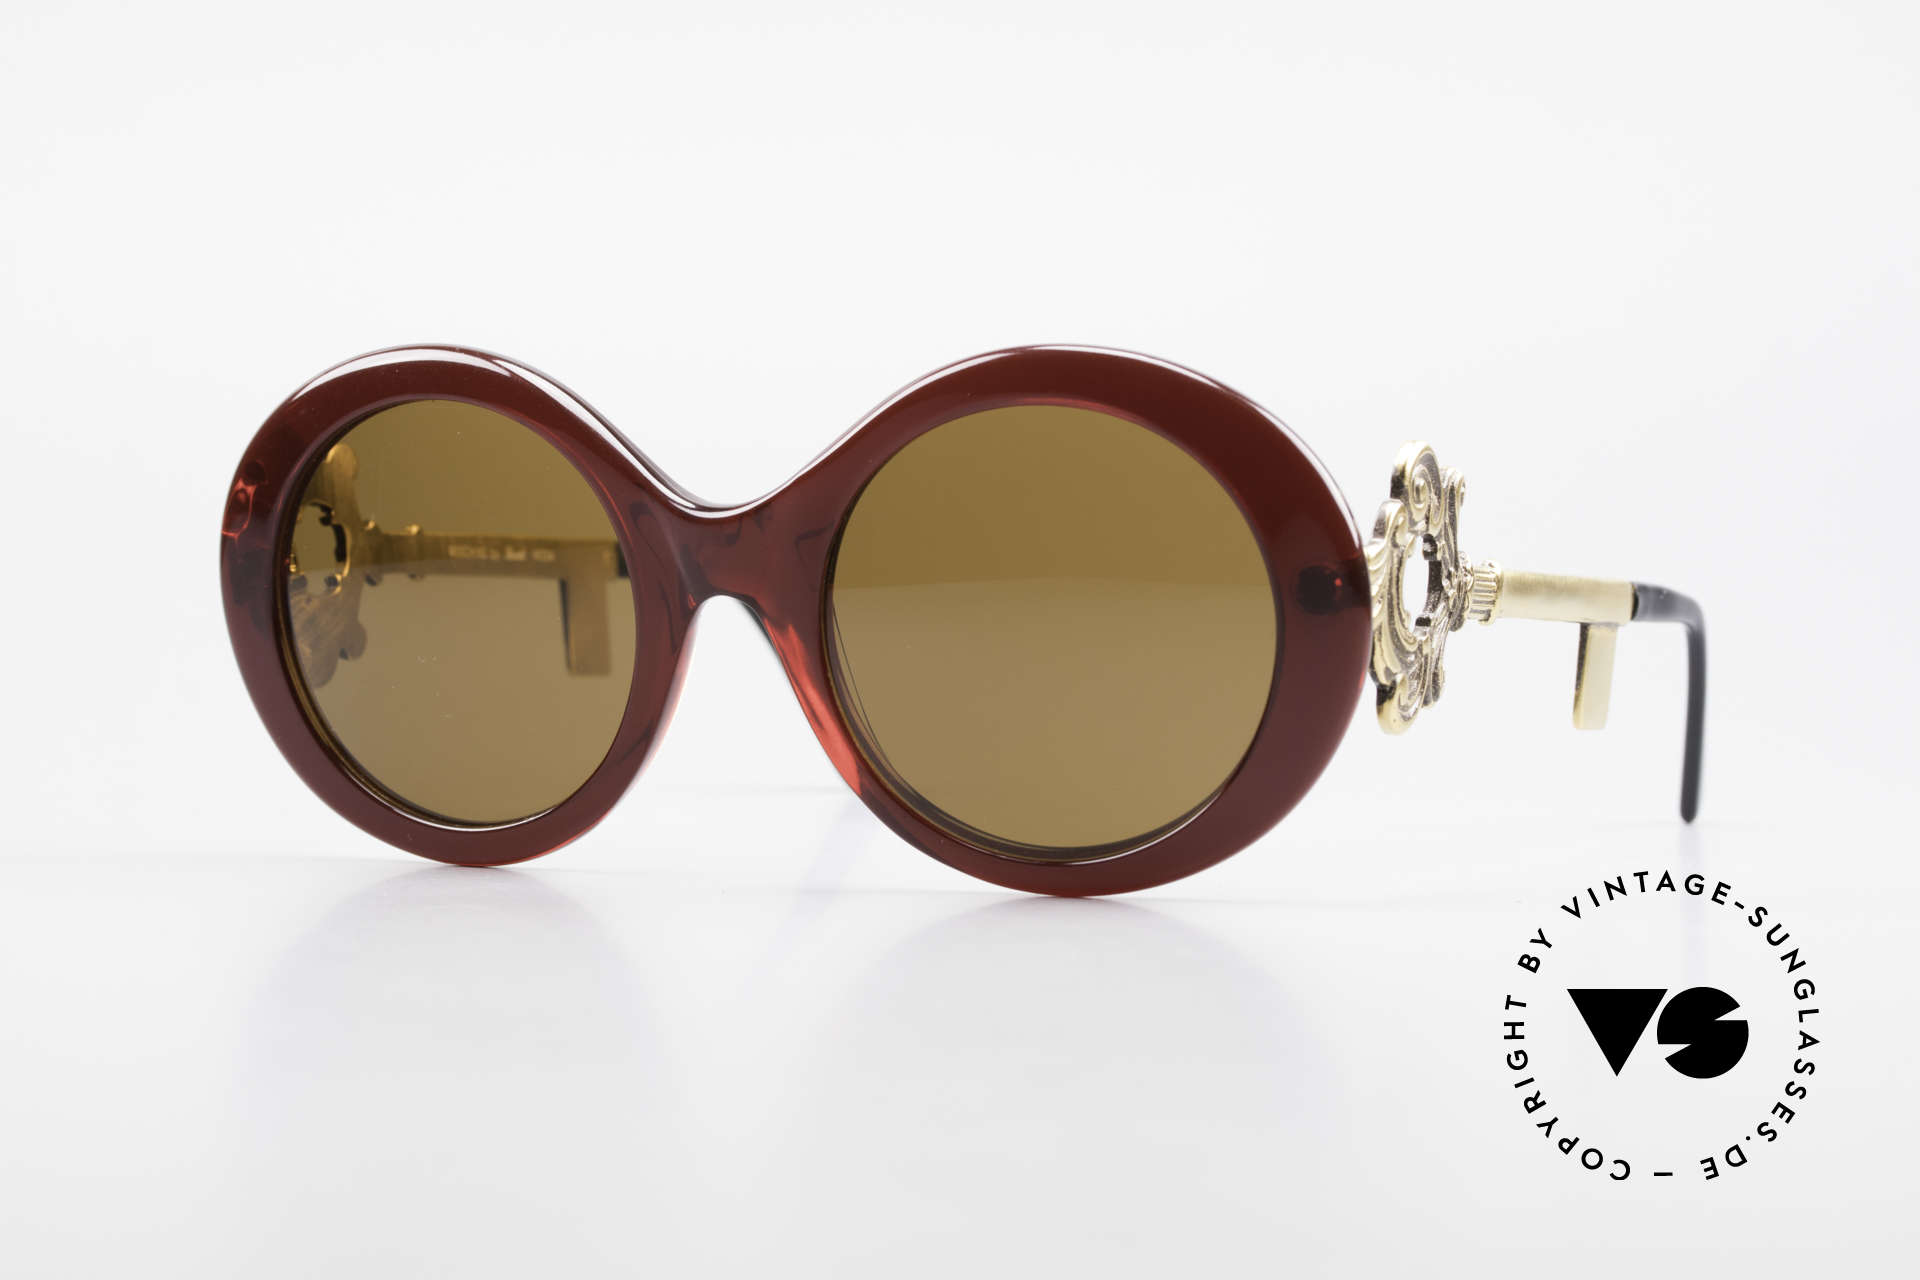 Moschino M254 Antique Key Sunglasses Rare, extraordinary MOSCHINO by Persol vintage shades, Made for Women